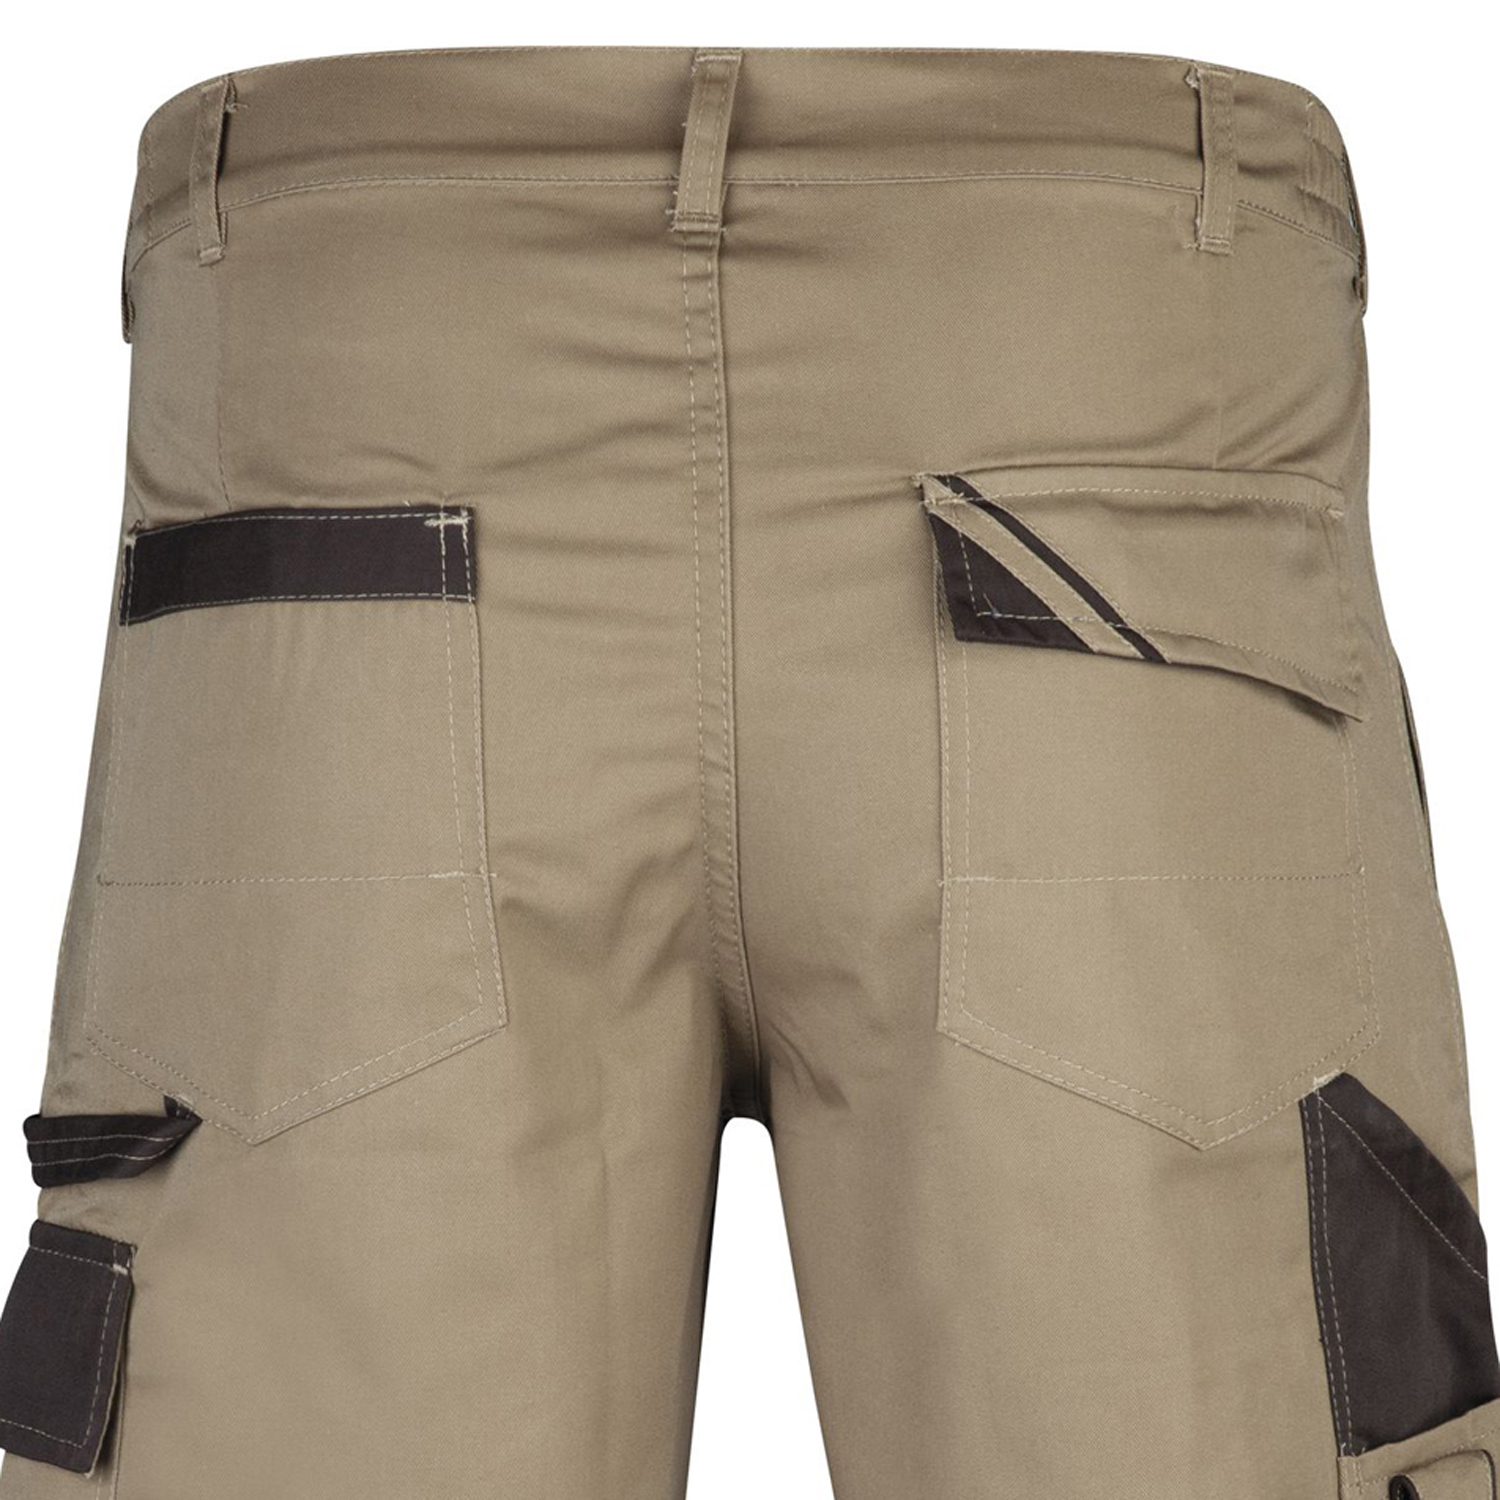 Workingshorts in brown by PKA Klöcker, large sizes up to 66